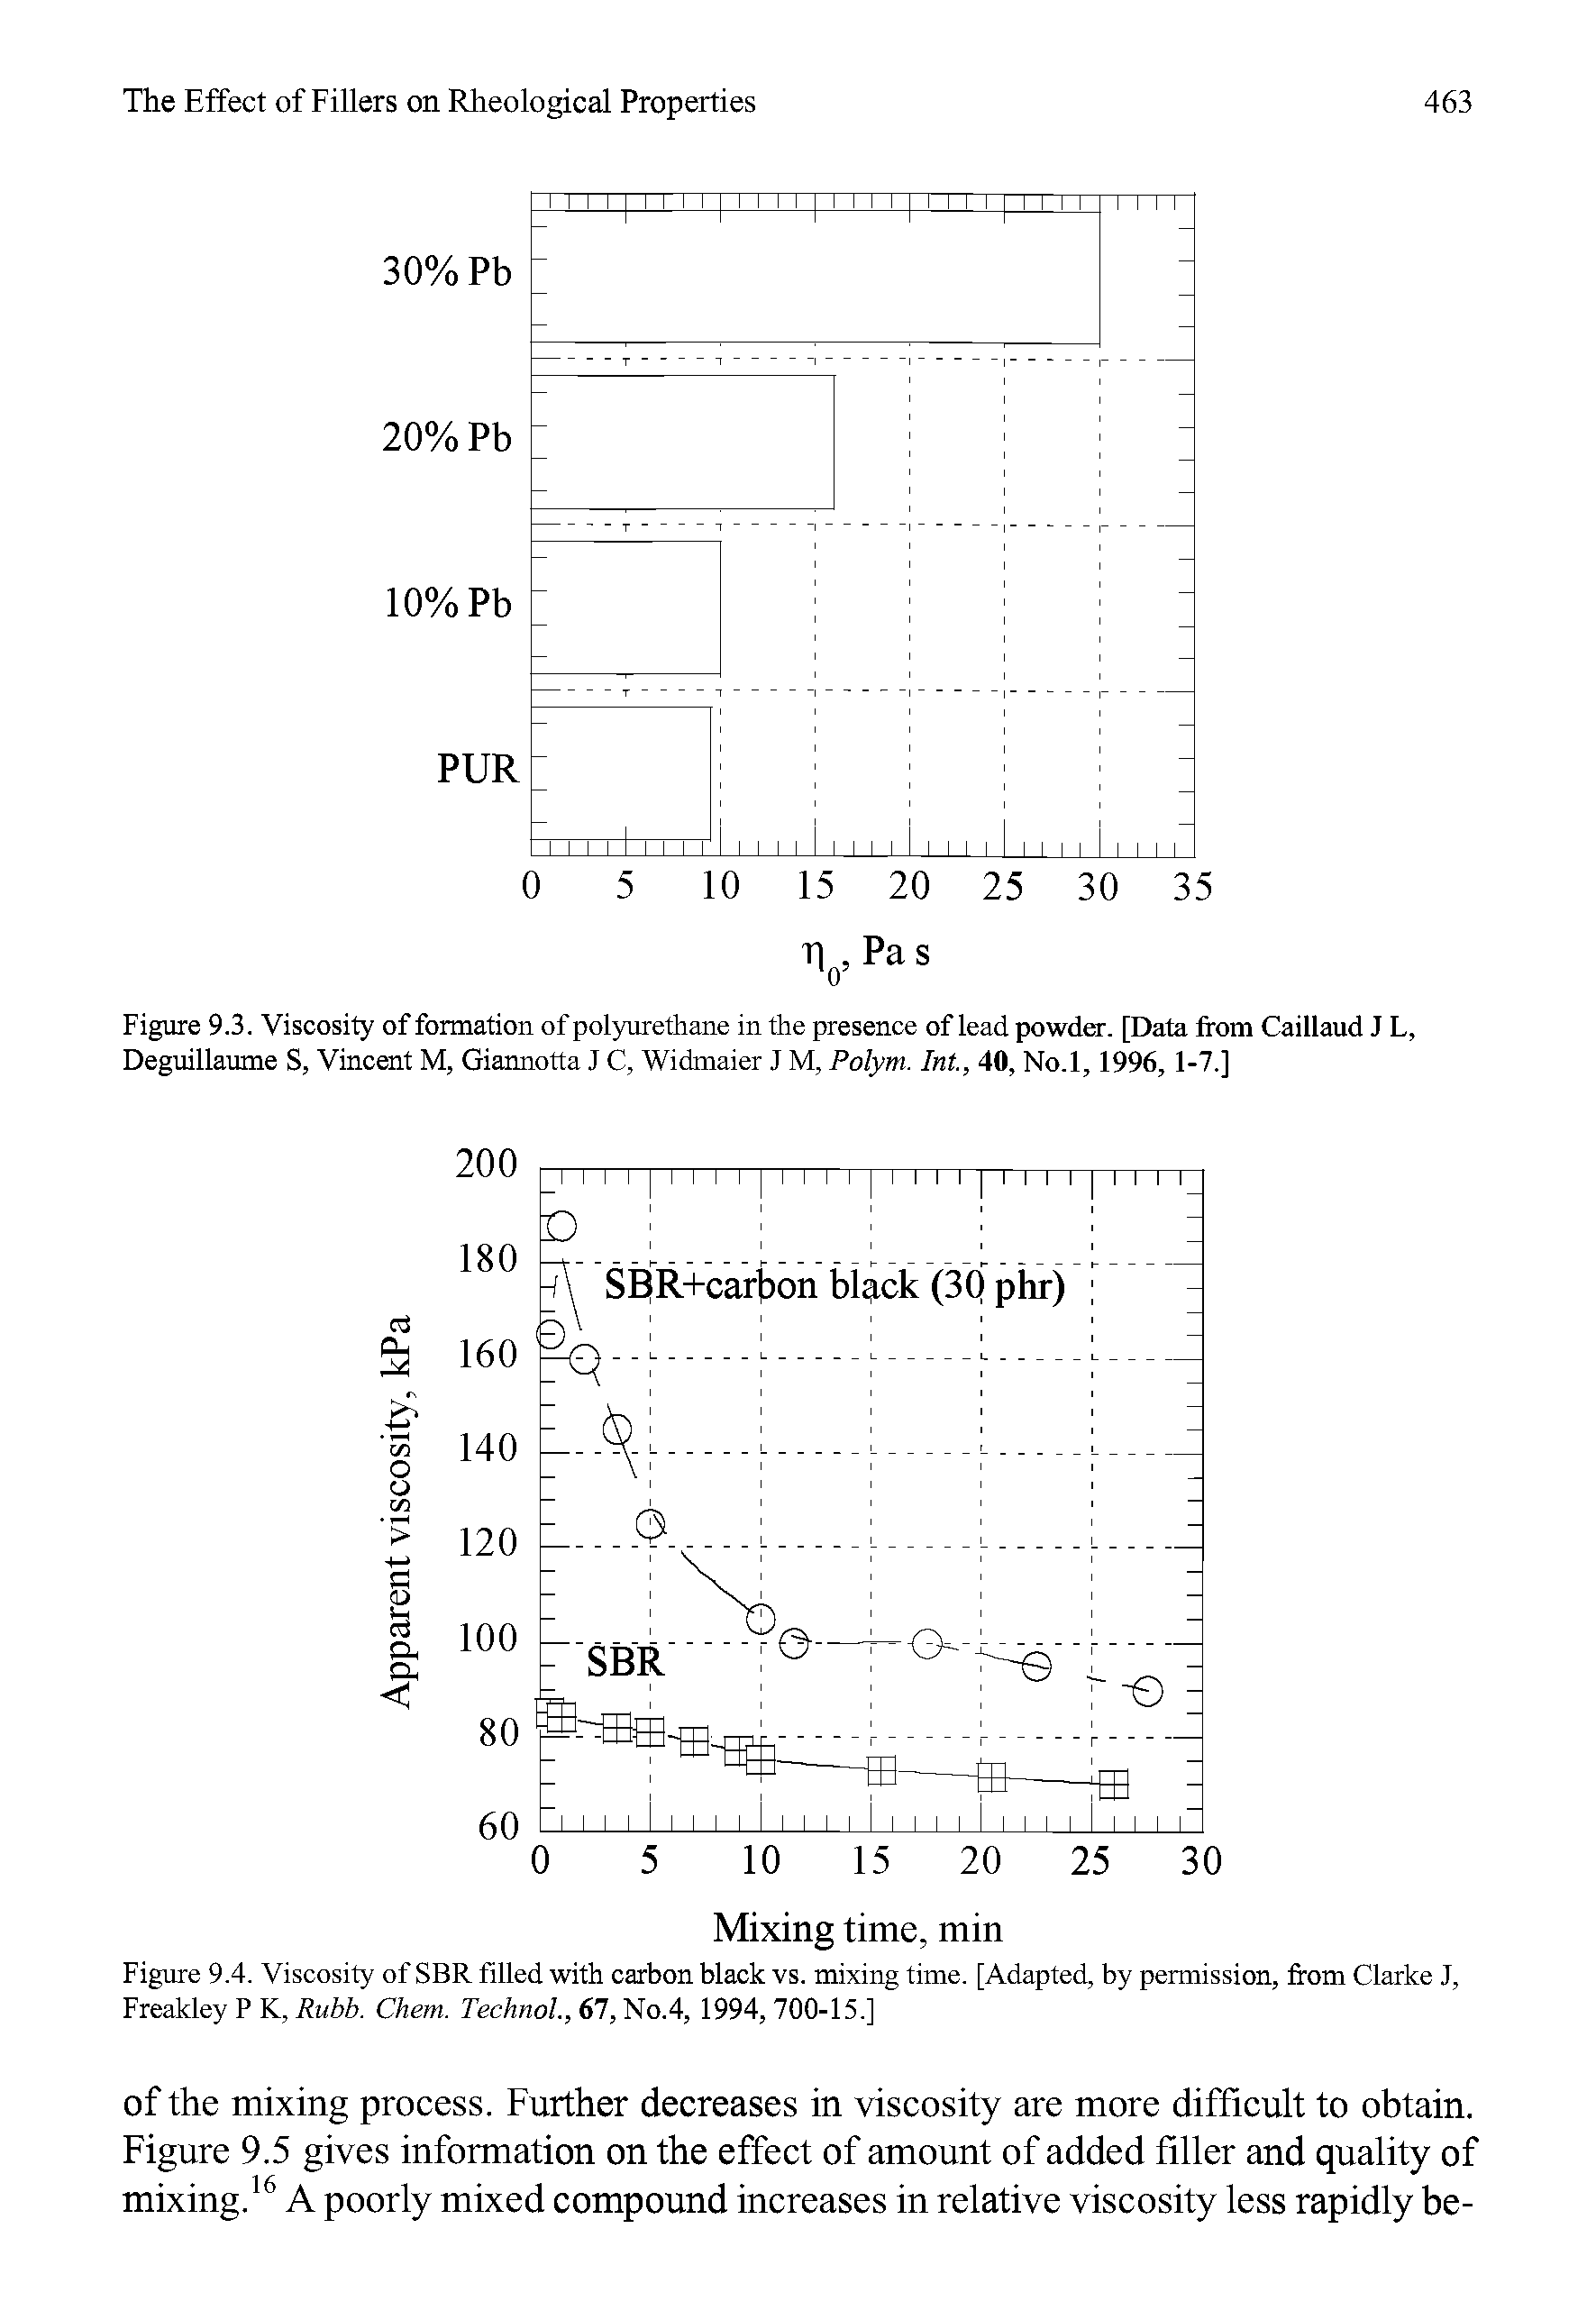 Figure 9.4. Viscosity of SBR filled with carbon black vs. mixing time. [Adapted, by permission, from Clarke J, Freakley P K, Rubb. Chem. TechnoL, 67, No.4, 1994, 700-15.]...